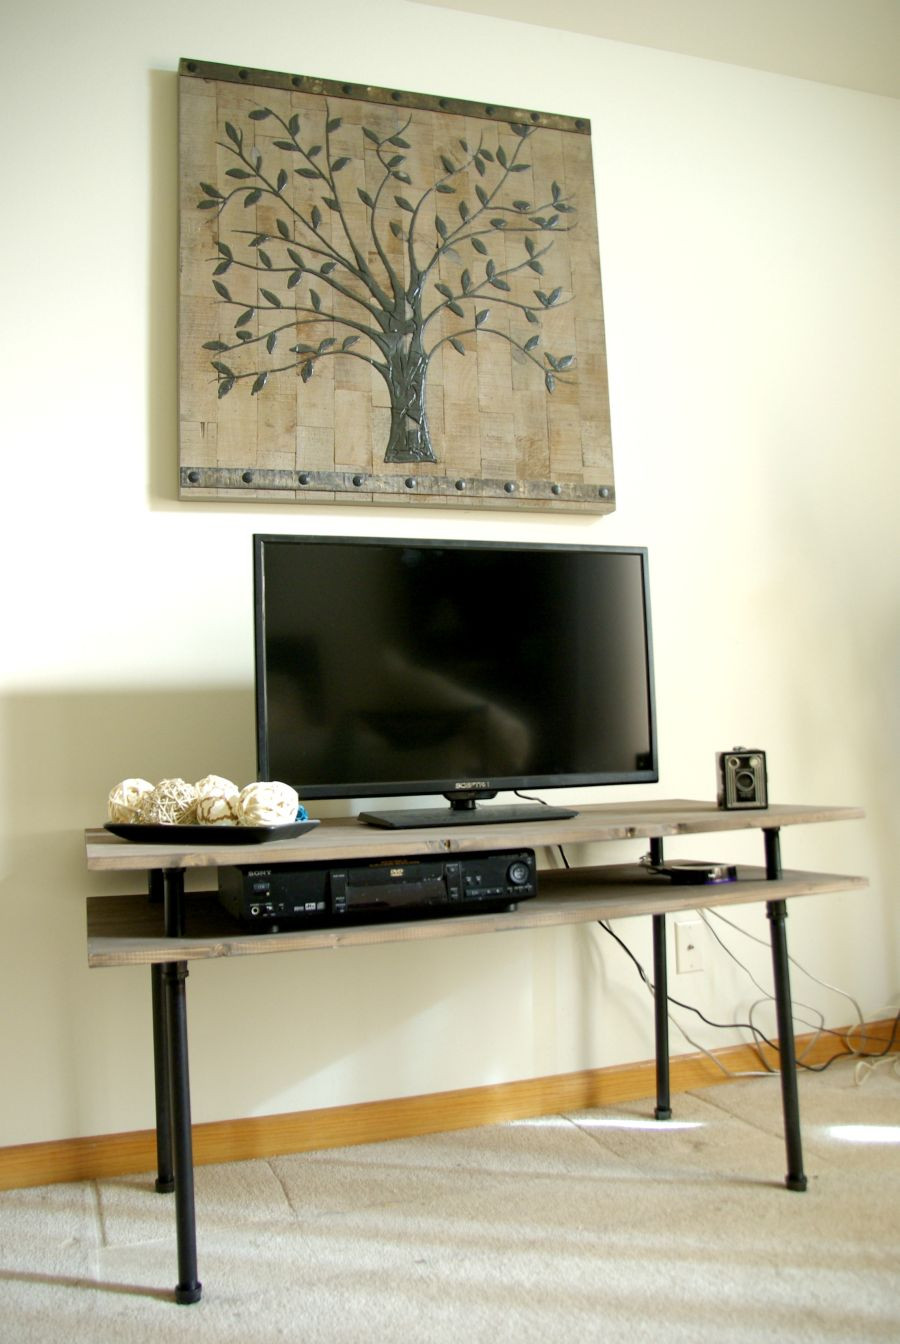 DIY Rustic Tv Stand Plans
 13 DIY Plans for Building a TV Stand